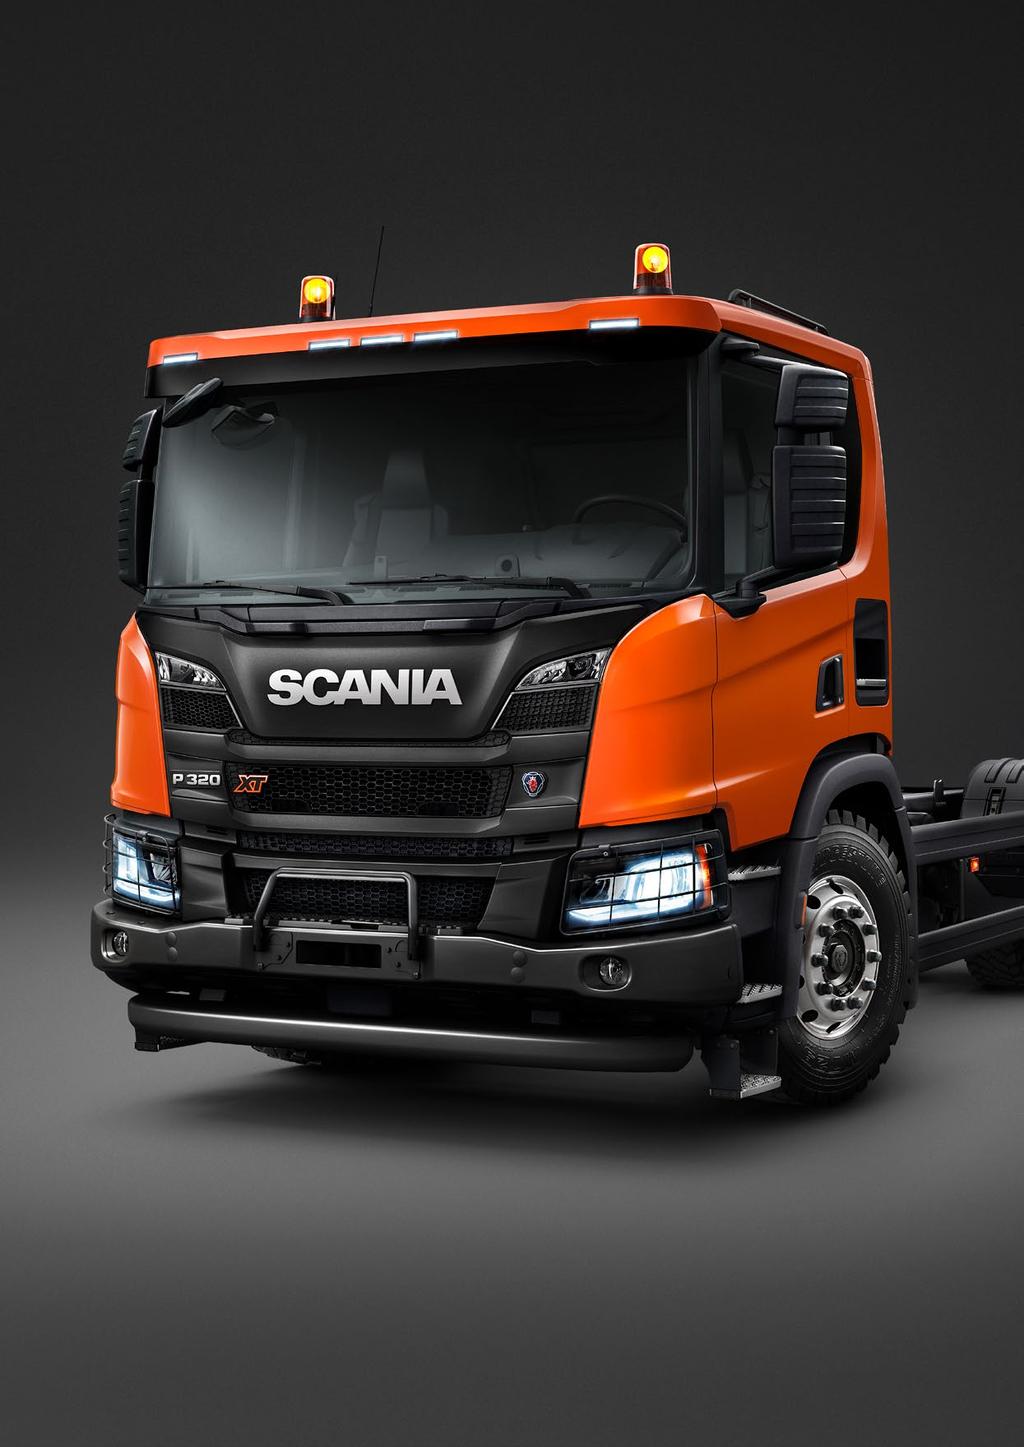 Scania XT Range Featuring a sturdy one-piece steel bumper, carrying a towing device with a towing capacity of 40 tonnes, headlamp protection, robust mirror casings, tailored powertrain and chassis